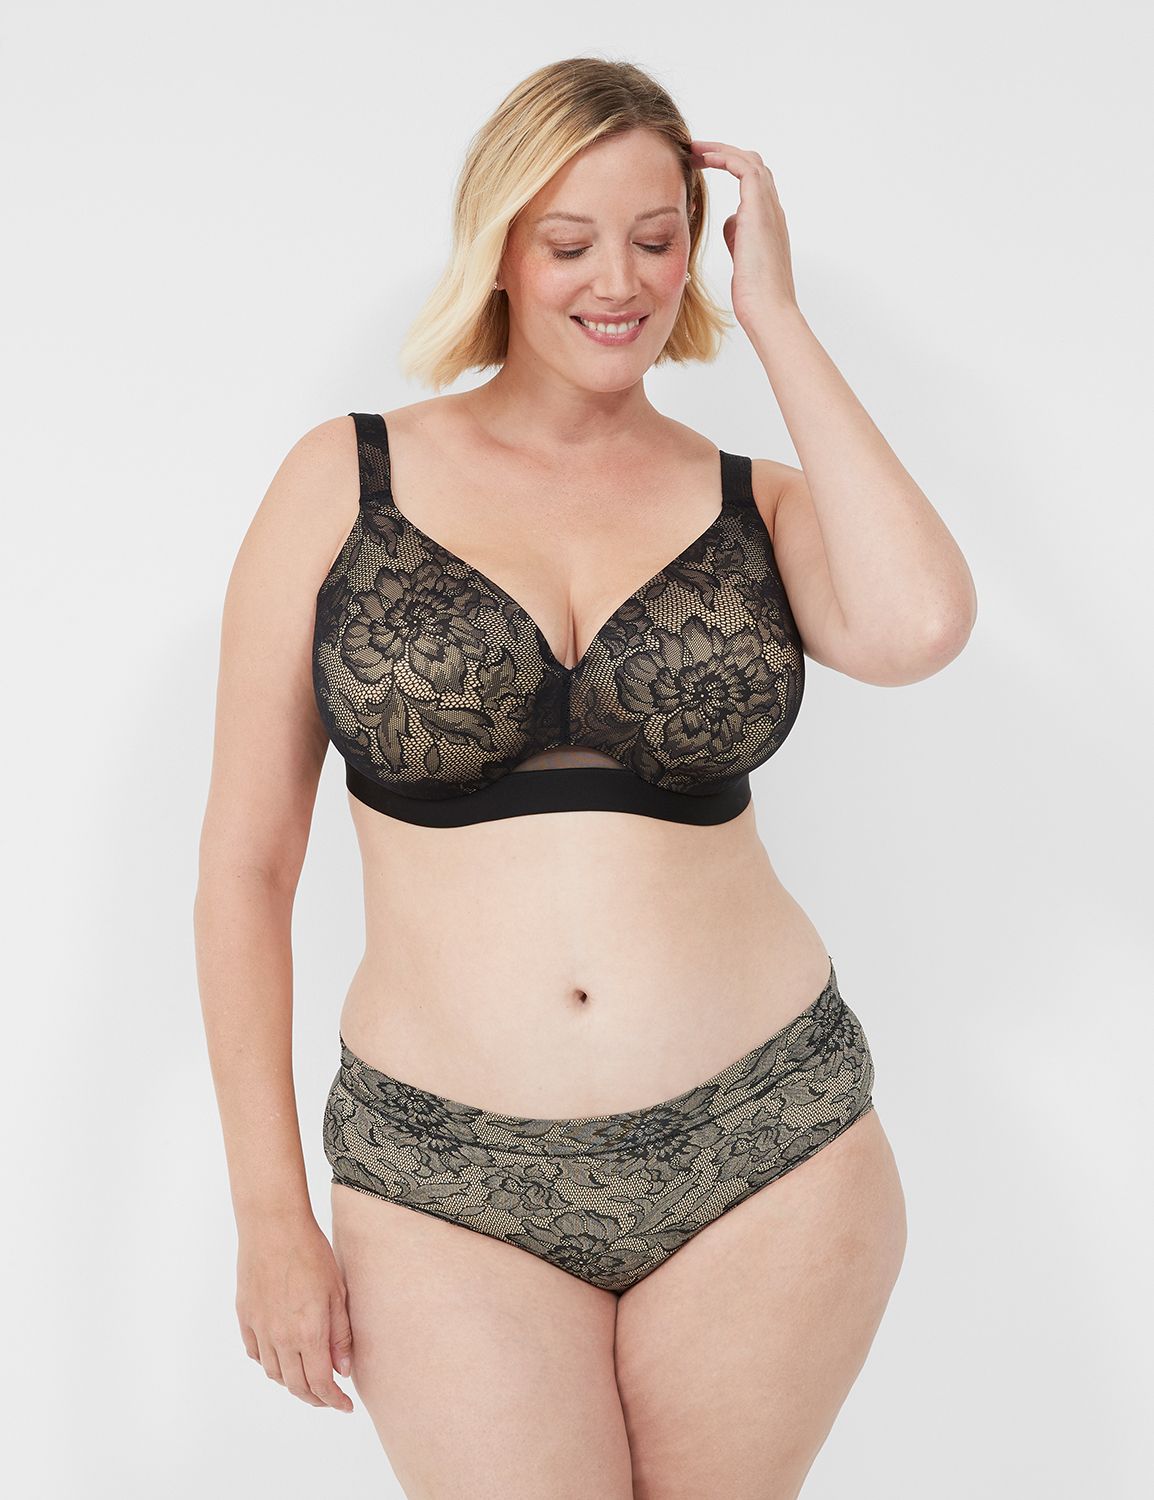 Size 36H Full Coverage Plus Size Bras: Cups B-K